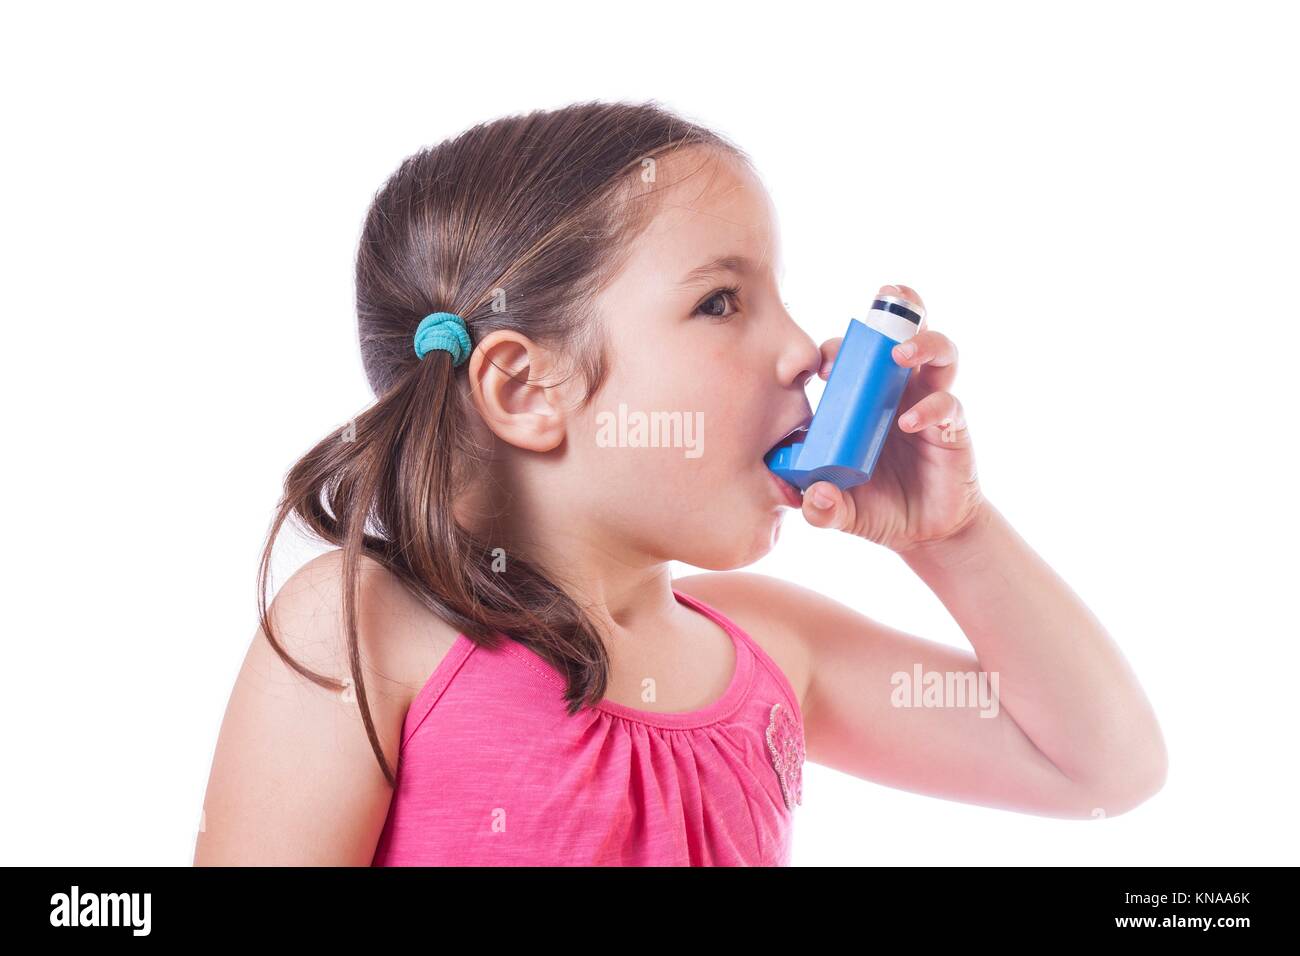 Little sick girl using medical spray for breath. Isolated over white background. Stock Photo